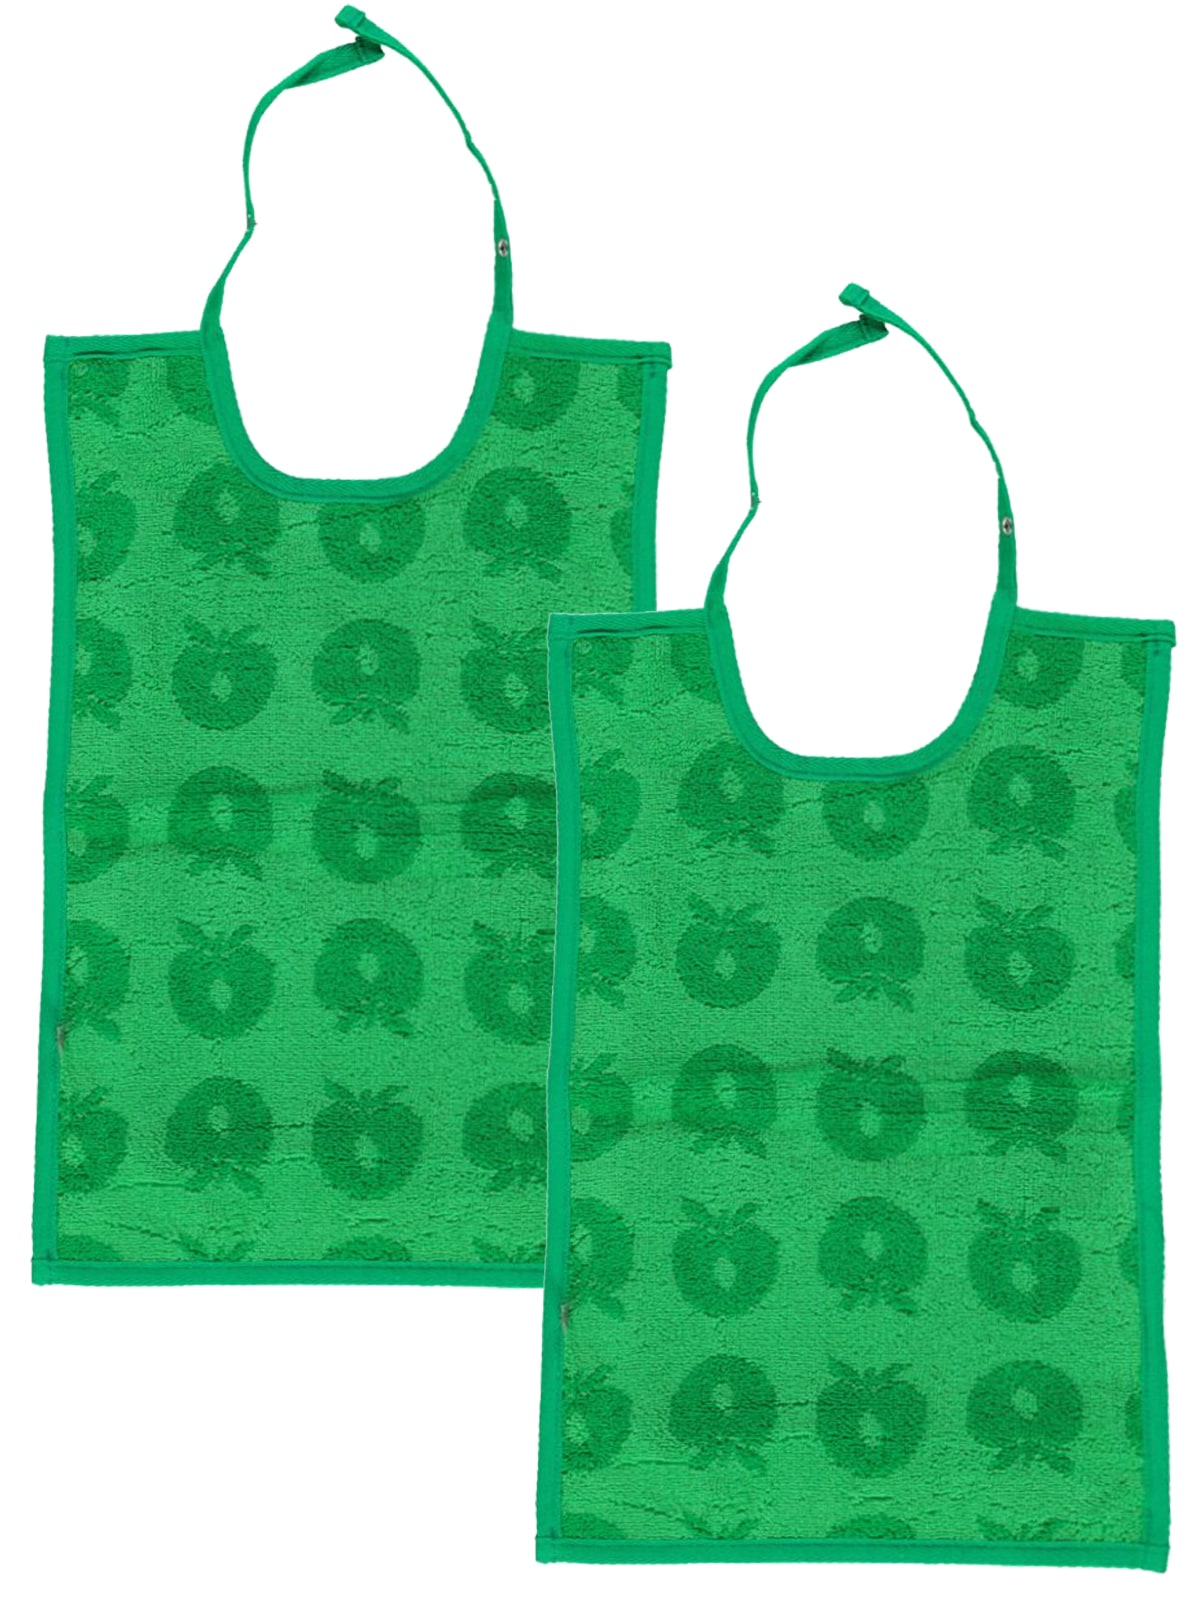 2 packs of large bibs with apples